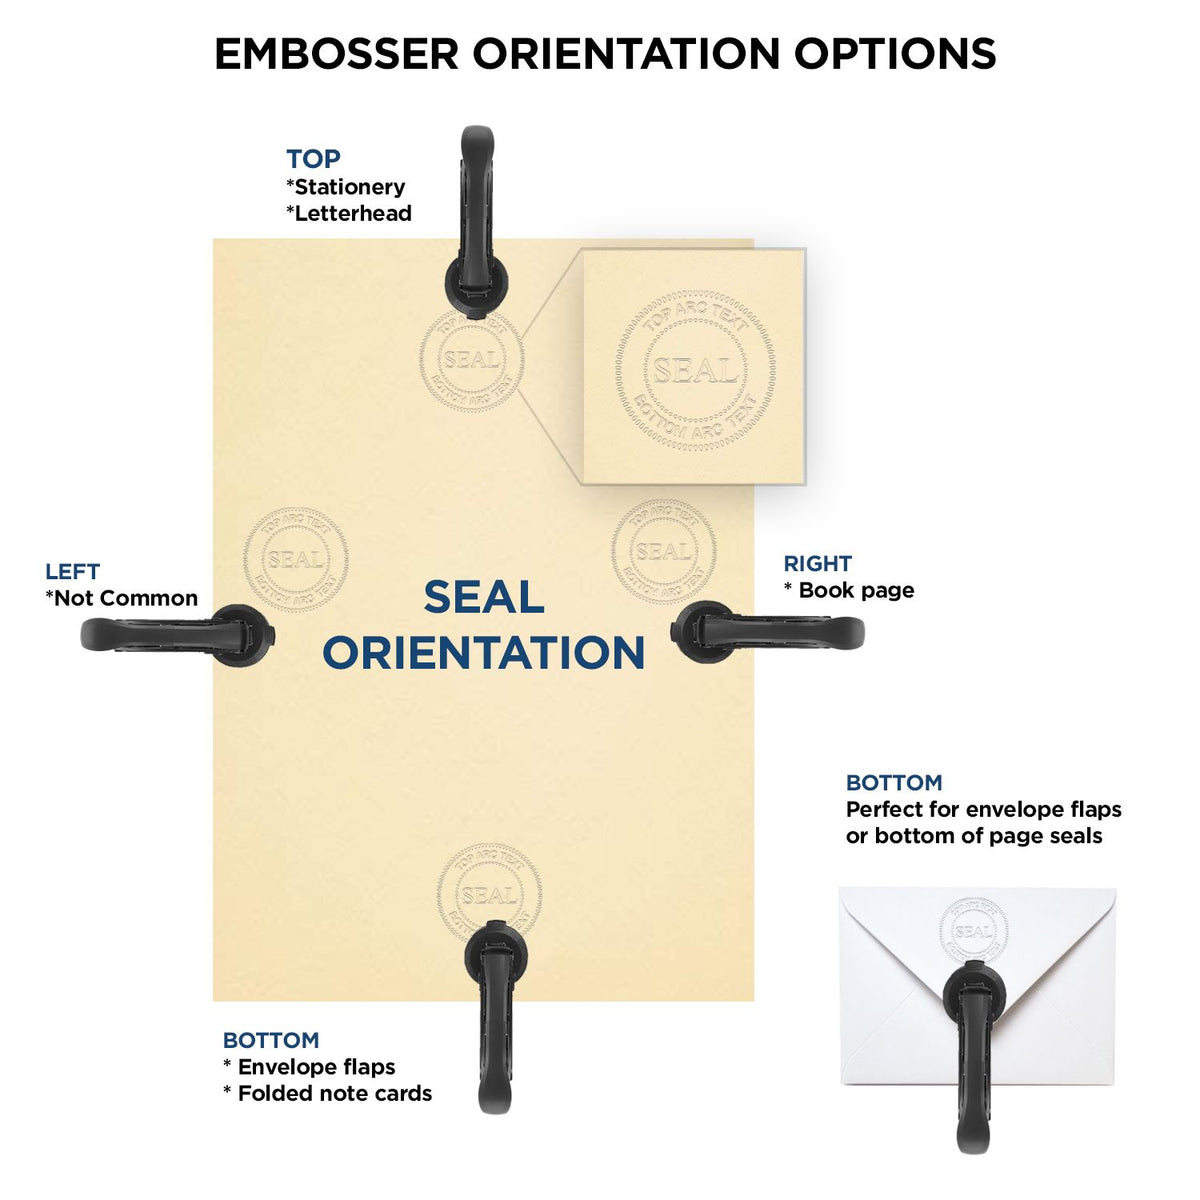 An infographic for the Handheld Florida Land Surveyor Seal showing embosser orientation, this is showing examples of a top, bottom, right and left insert.